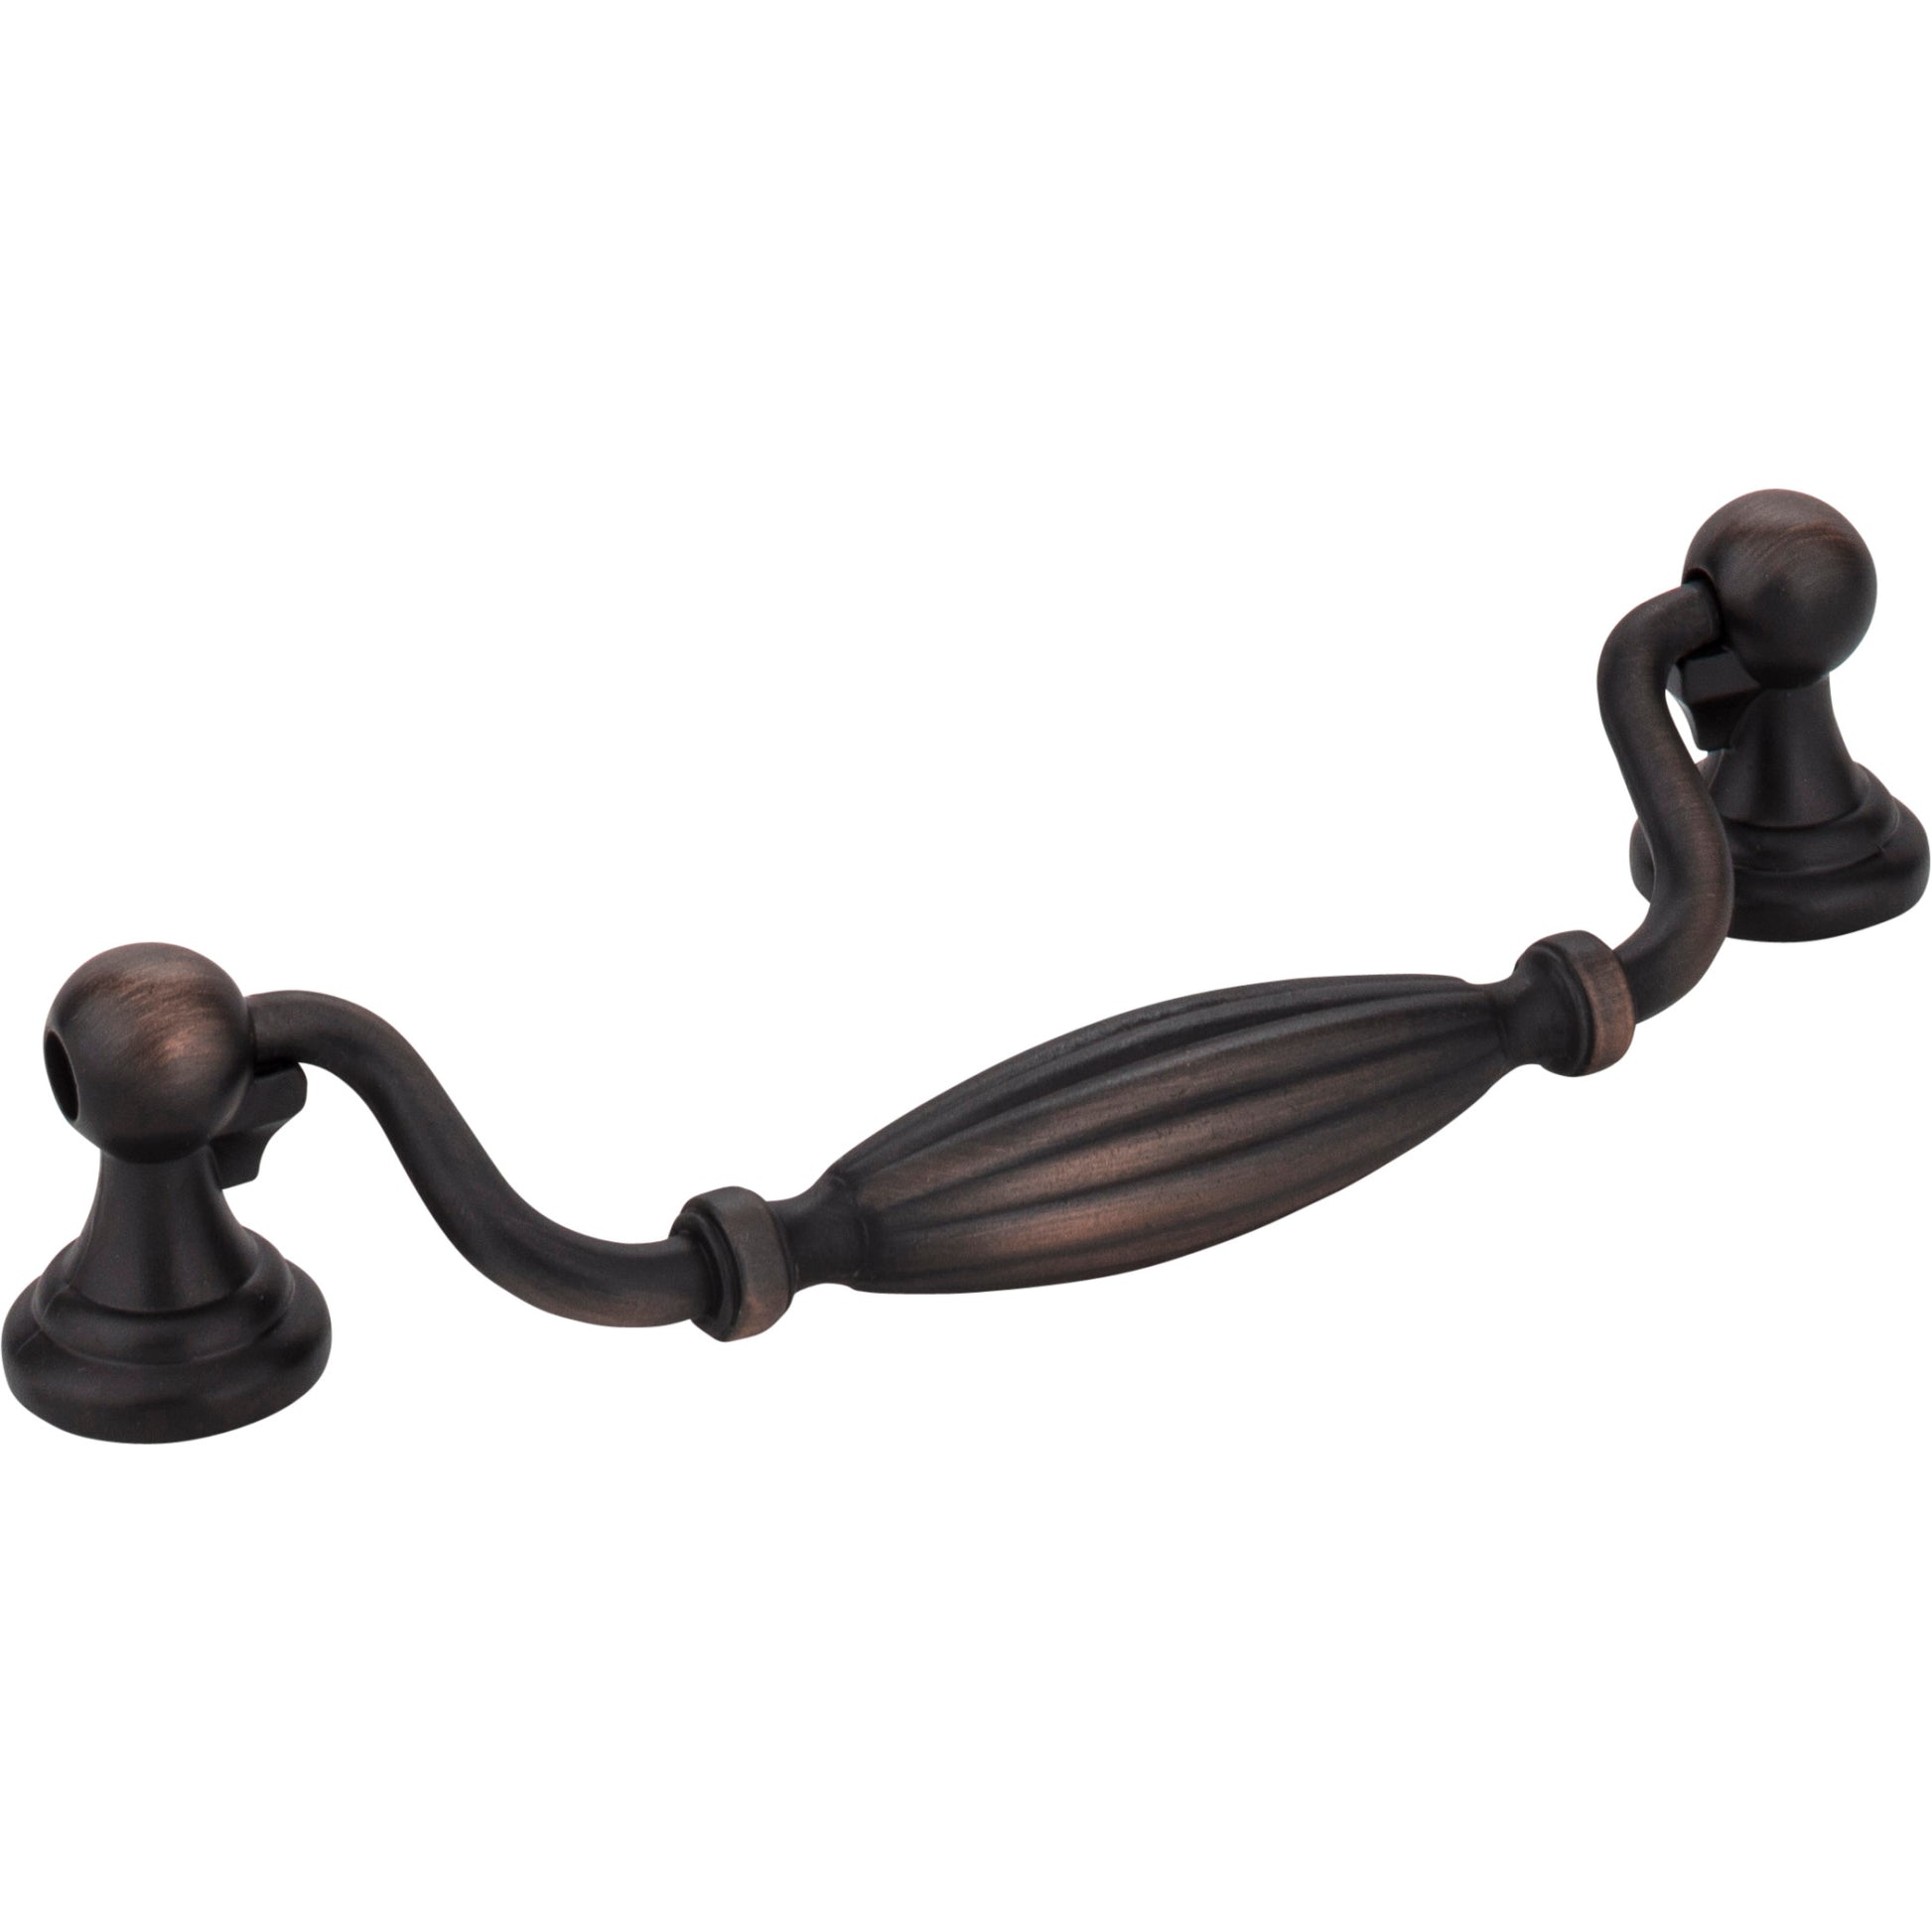 JEFFREY ALEXANDER 718-128DBAC 128 mm Center-to-Center Brushed Oil Rubbed Bronze Glenmore Cabinet Drop Pull